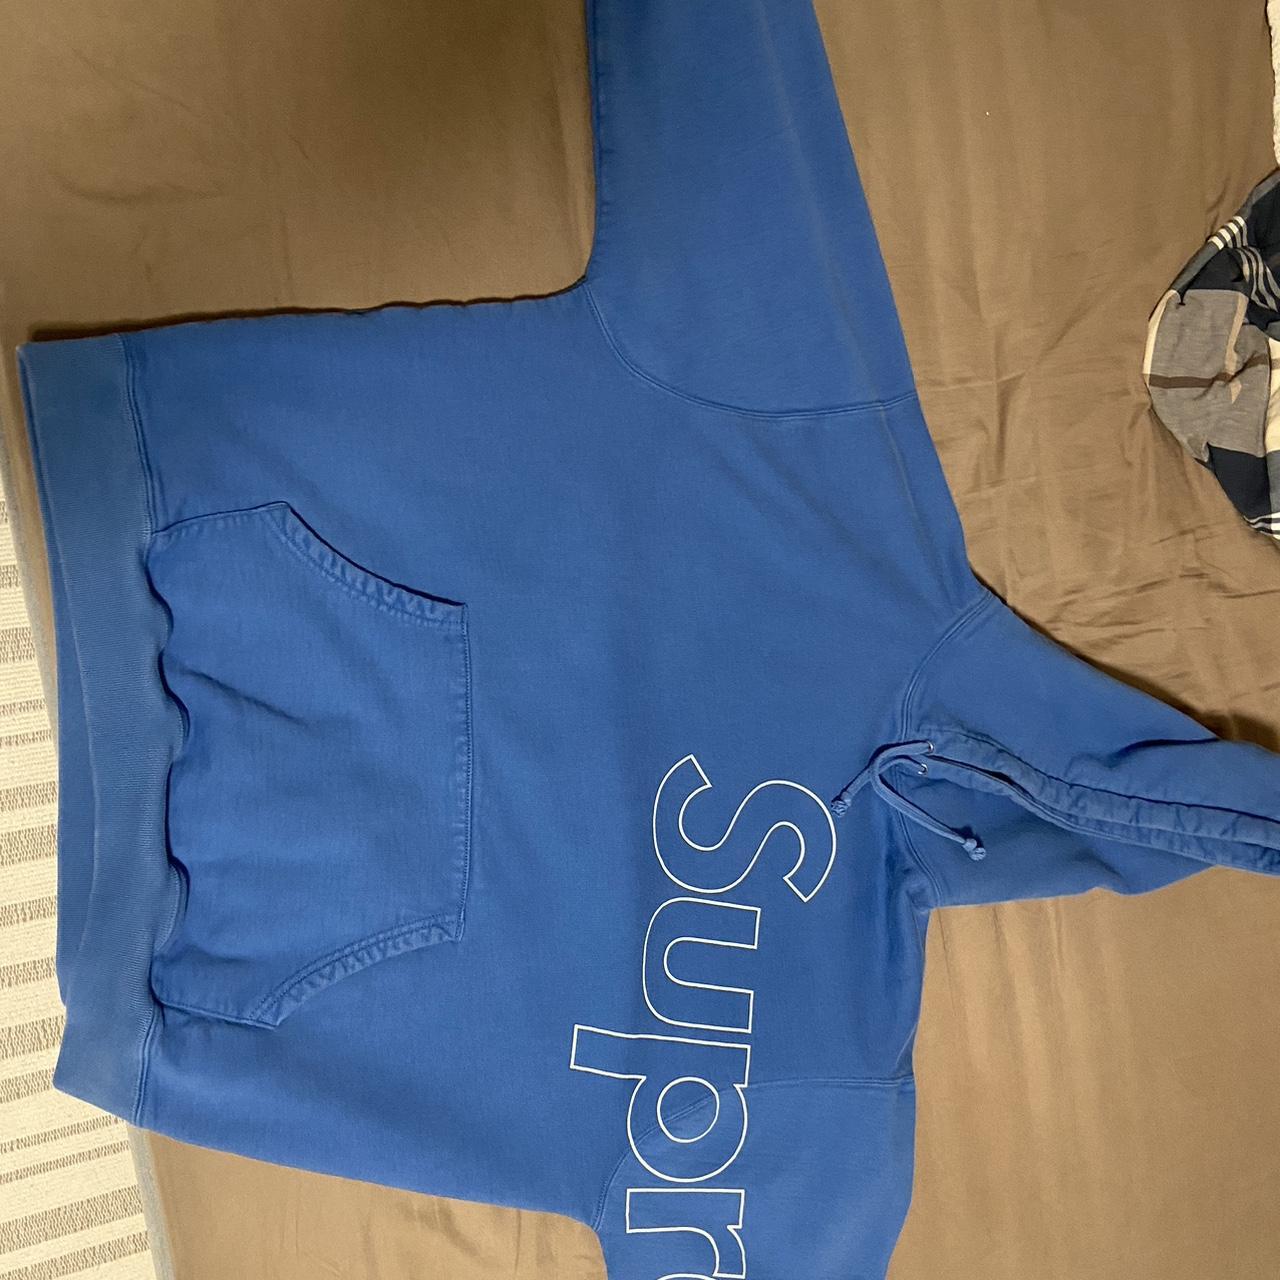 Supreme hoodie • Price is p firm on this one! • - Depop